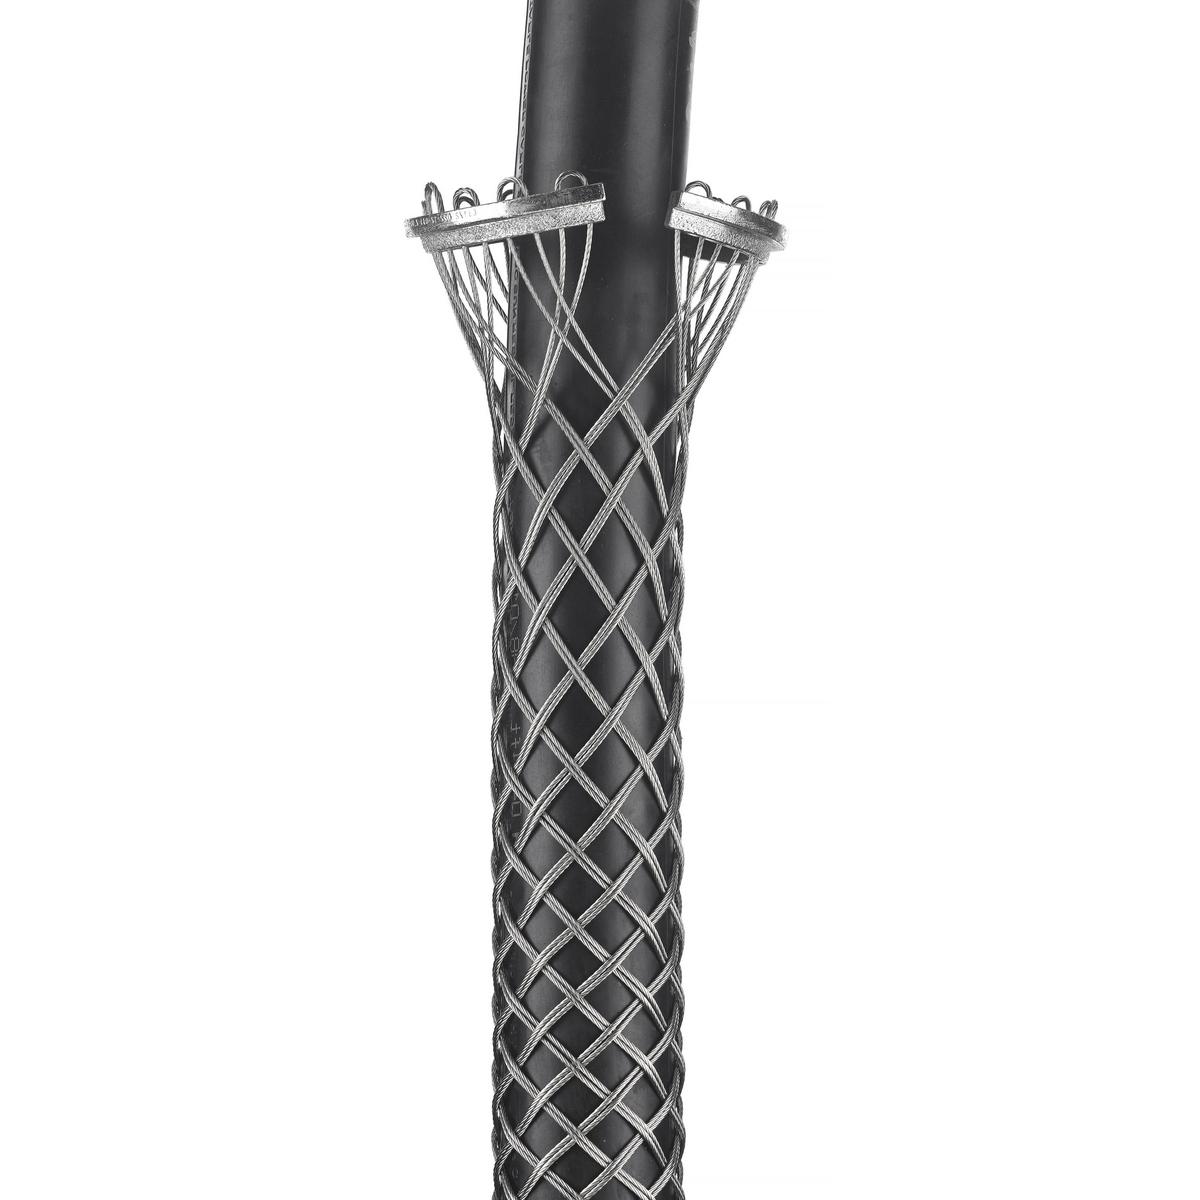 Hubbell 02212017 Conduit Riser Grips, 1.25-1.49", 2.50", Ring Type, Double Weave, Split Mesh, Lace Closing  ; Suitable for standard rigid metal conduit and schedule 40 rigid PVC conduit only ; Pemanently fastened to support ring ; For permanent support when cable end is a